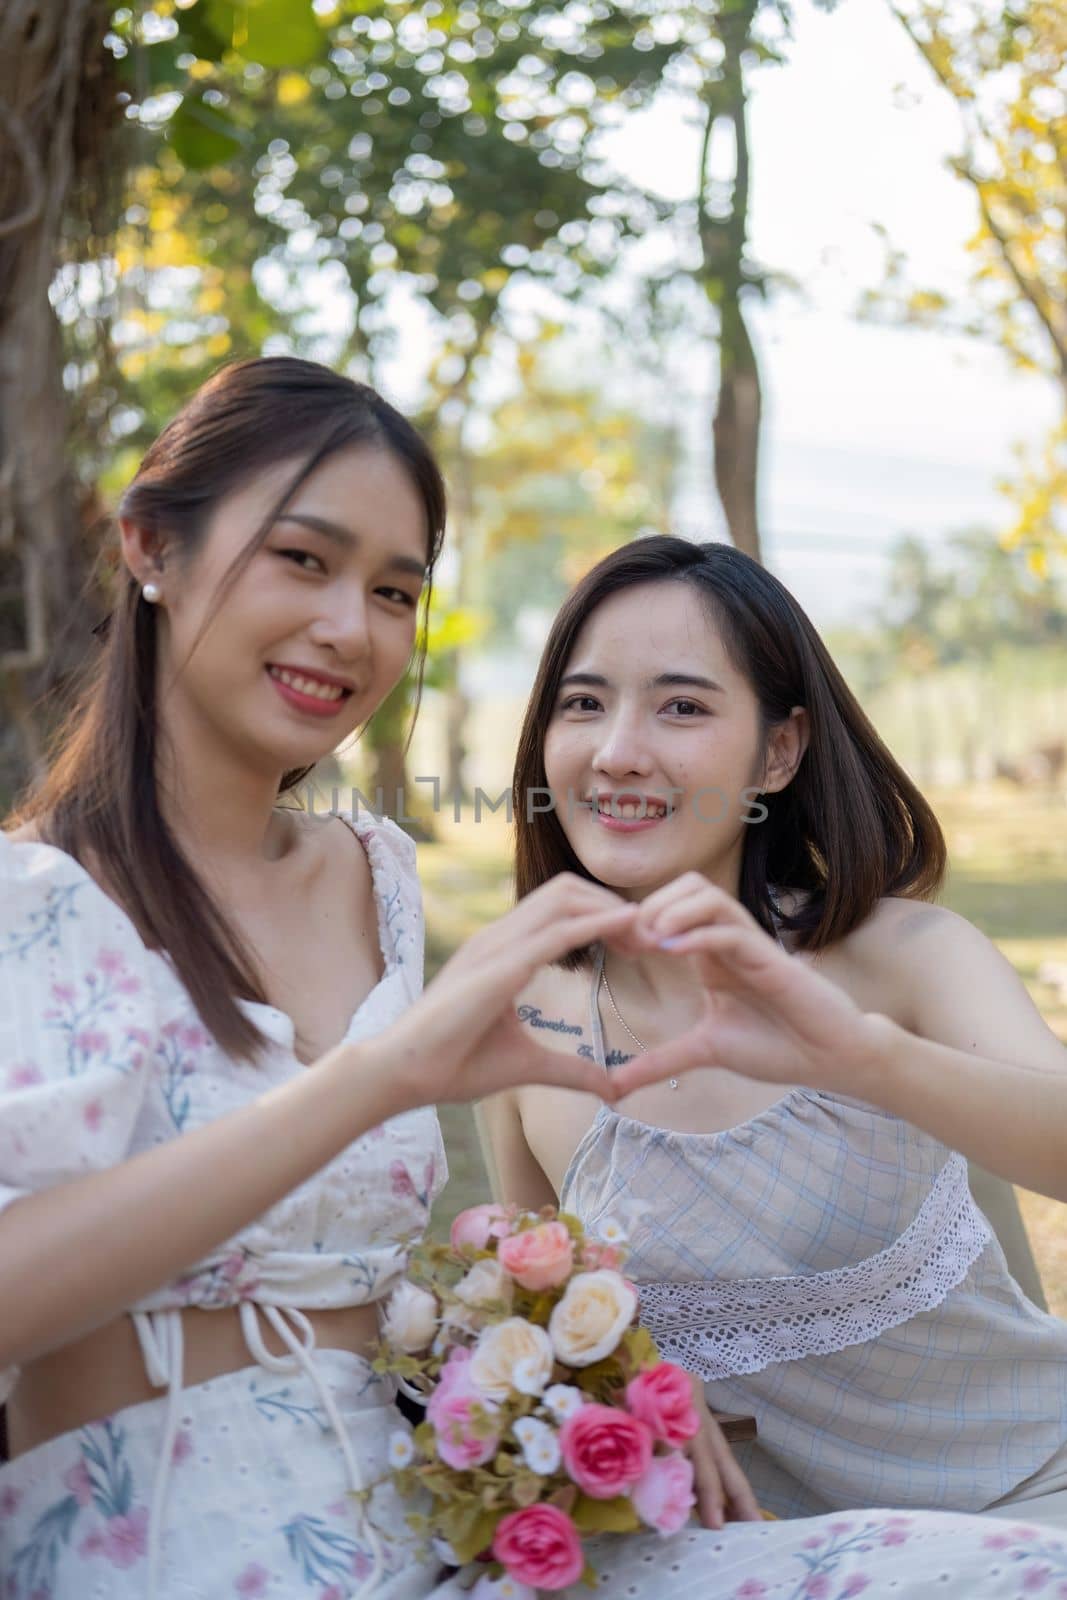 Asian woman friends, they are having picnic,they talk happily,charming Asian woman makes a heart hand sign with her friend while picnic in the park.